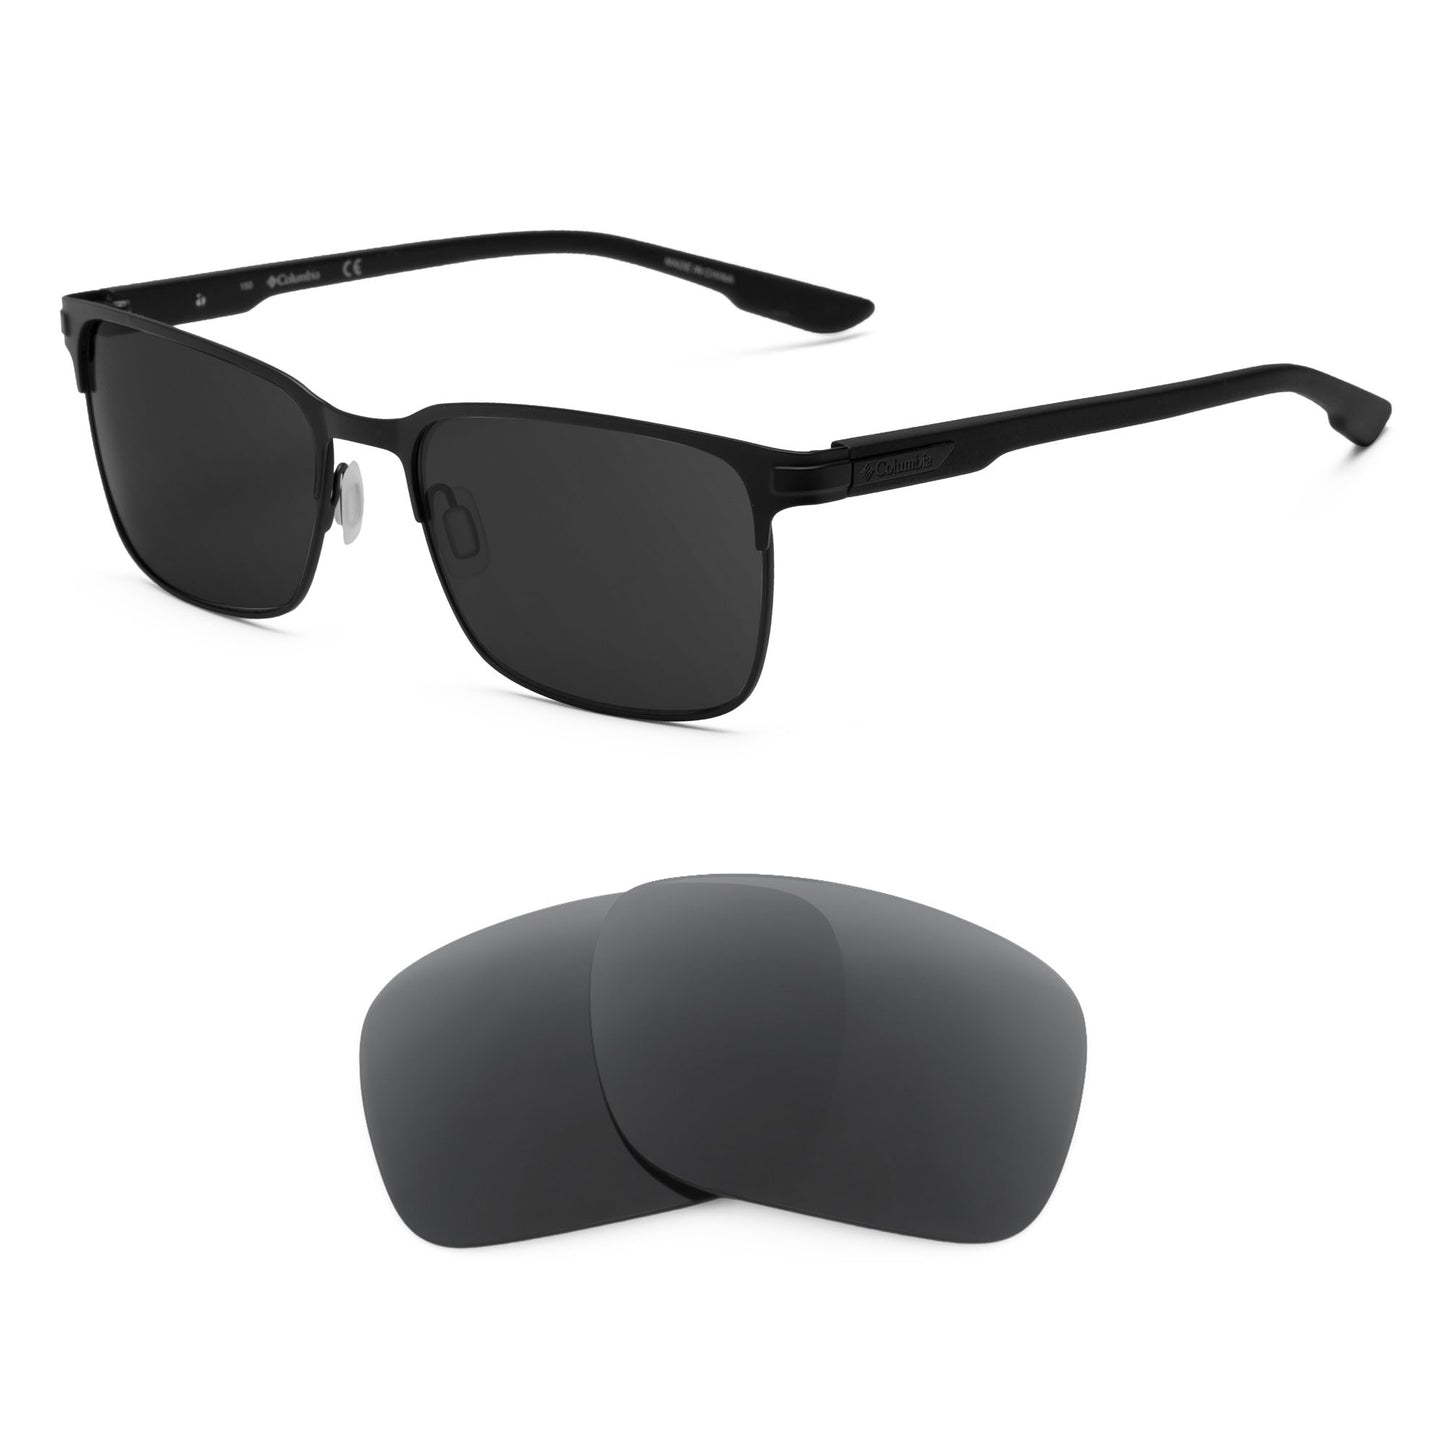 Columbia Pike Lake sunglasses with replacement lenses